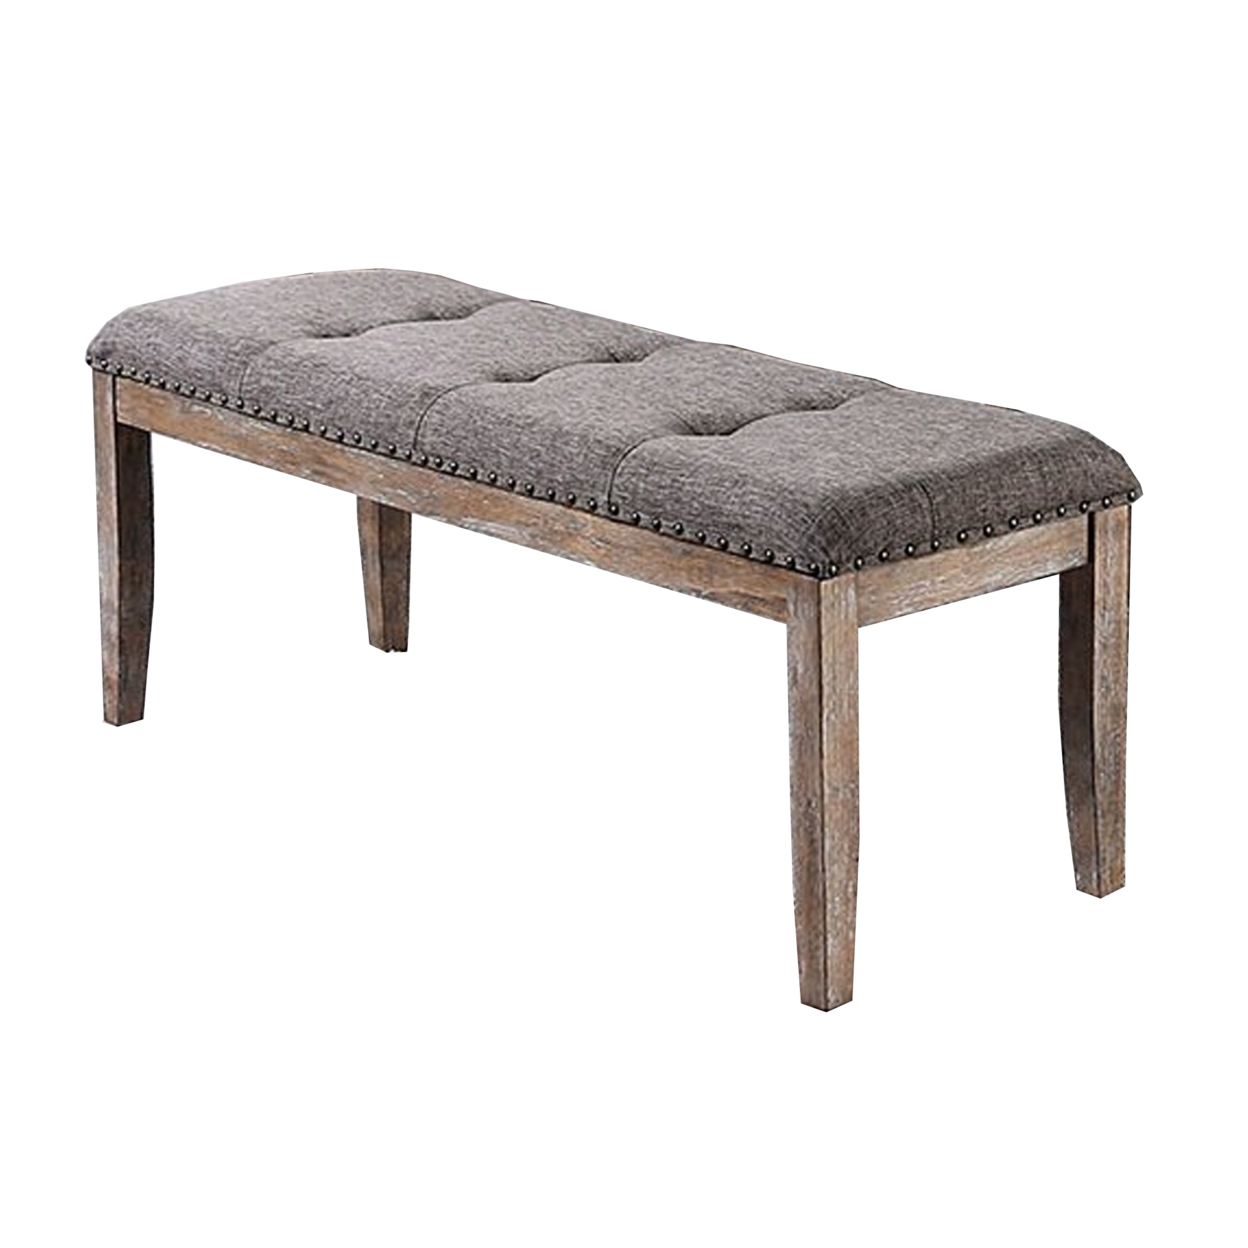 Rectangular Shaped Solid Wood And Fabric Upholstered Bench With Nail Head Trims , Brown And Gray- Saltoro Sherpi